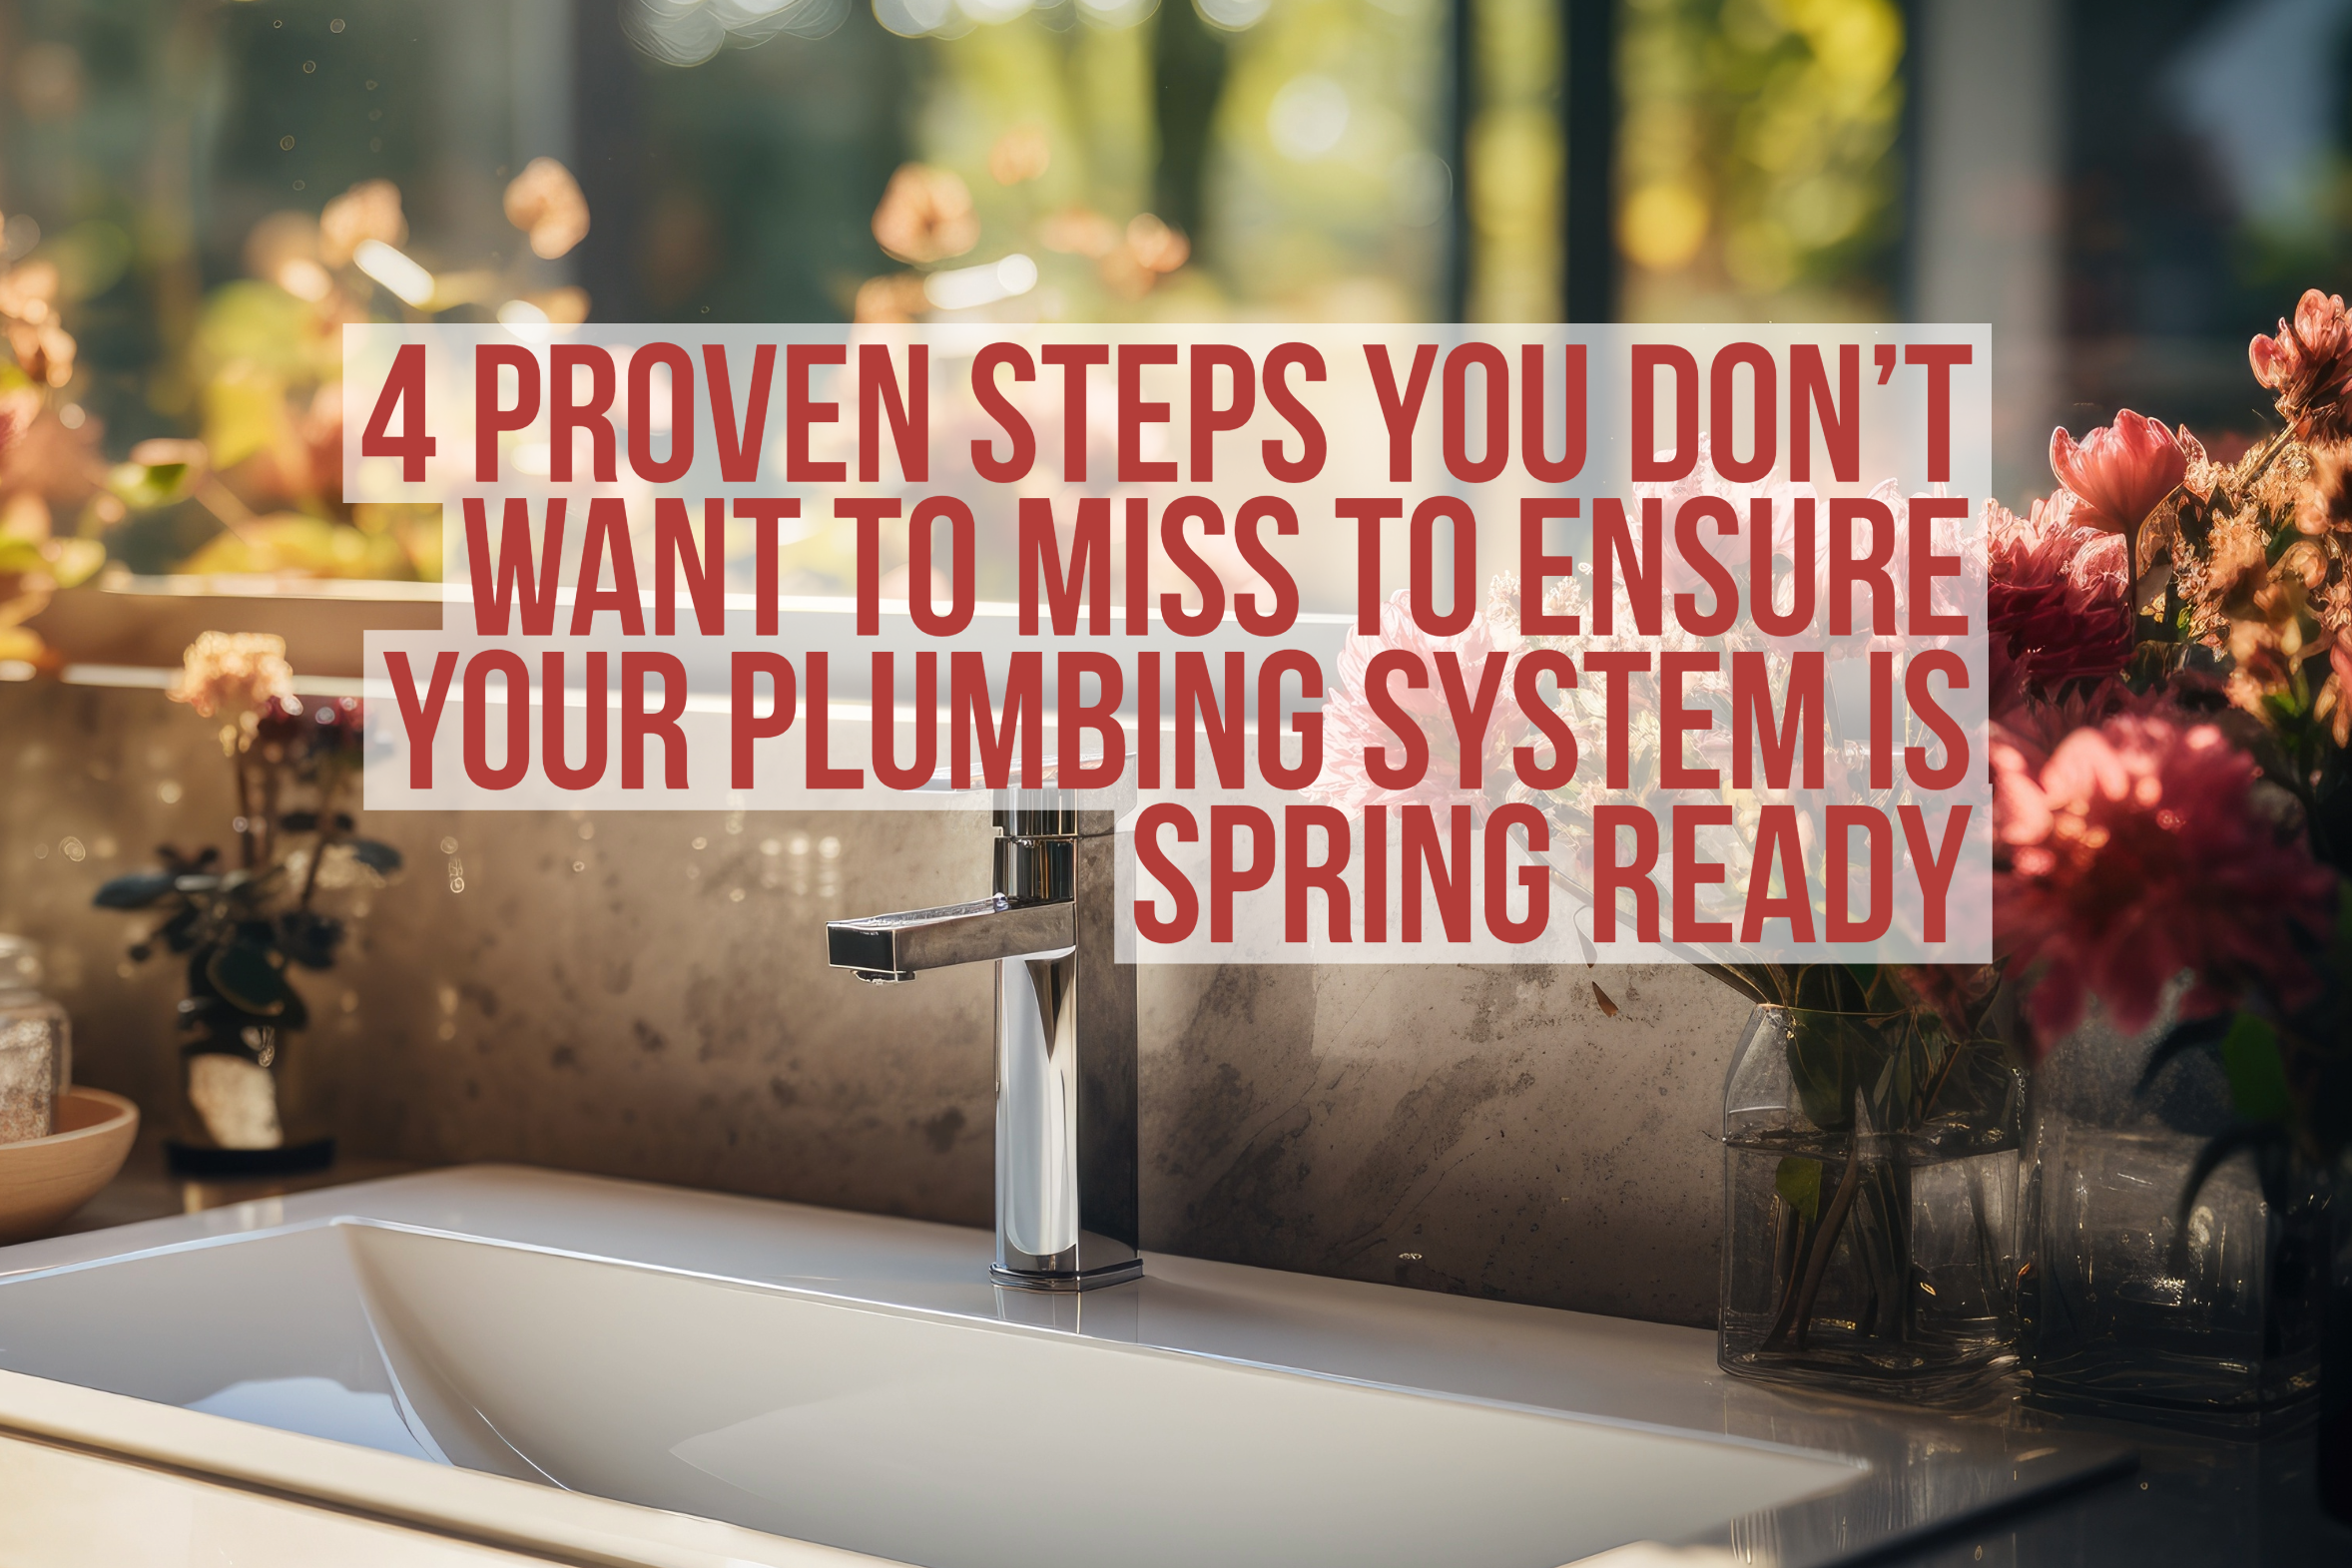 Steps to making sure your plumbing system is spring ready!